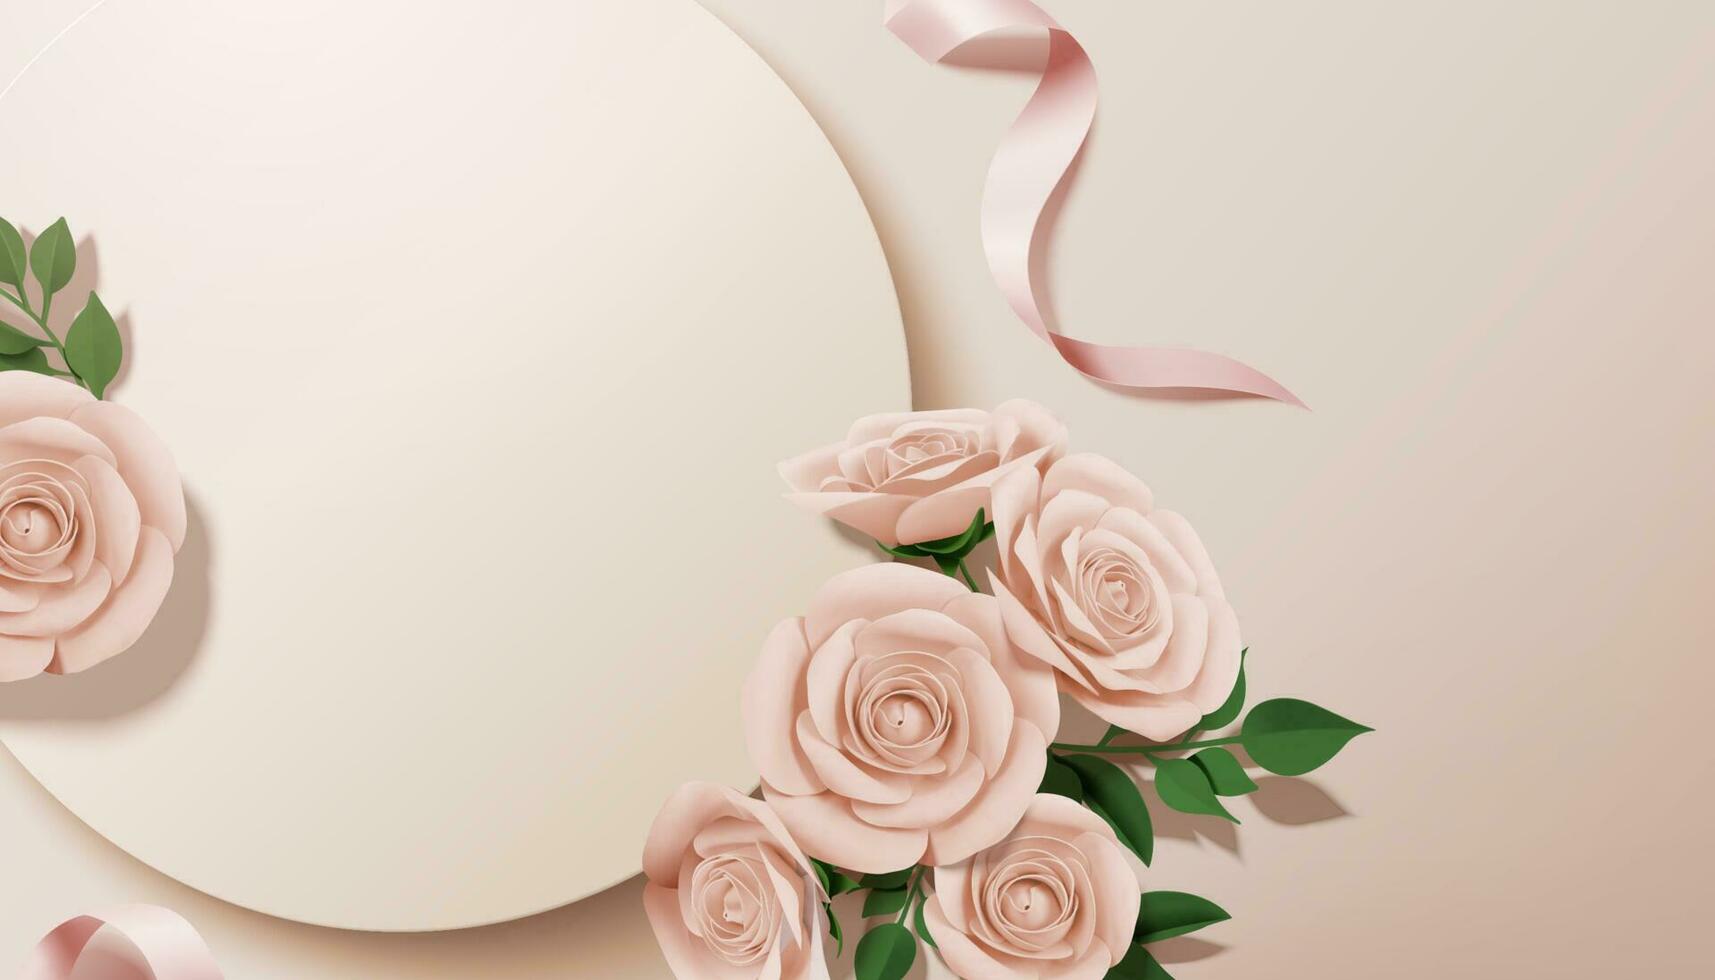 Paper rose with round background in 3d illustration vector